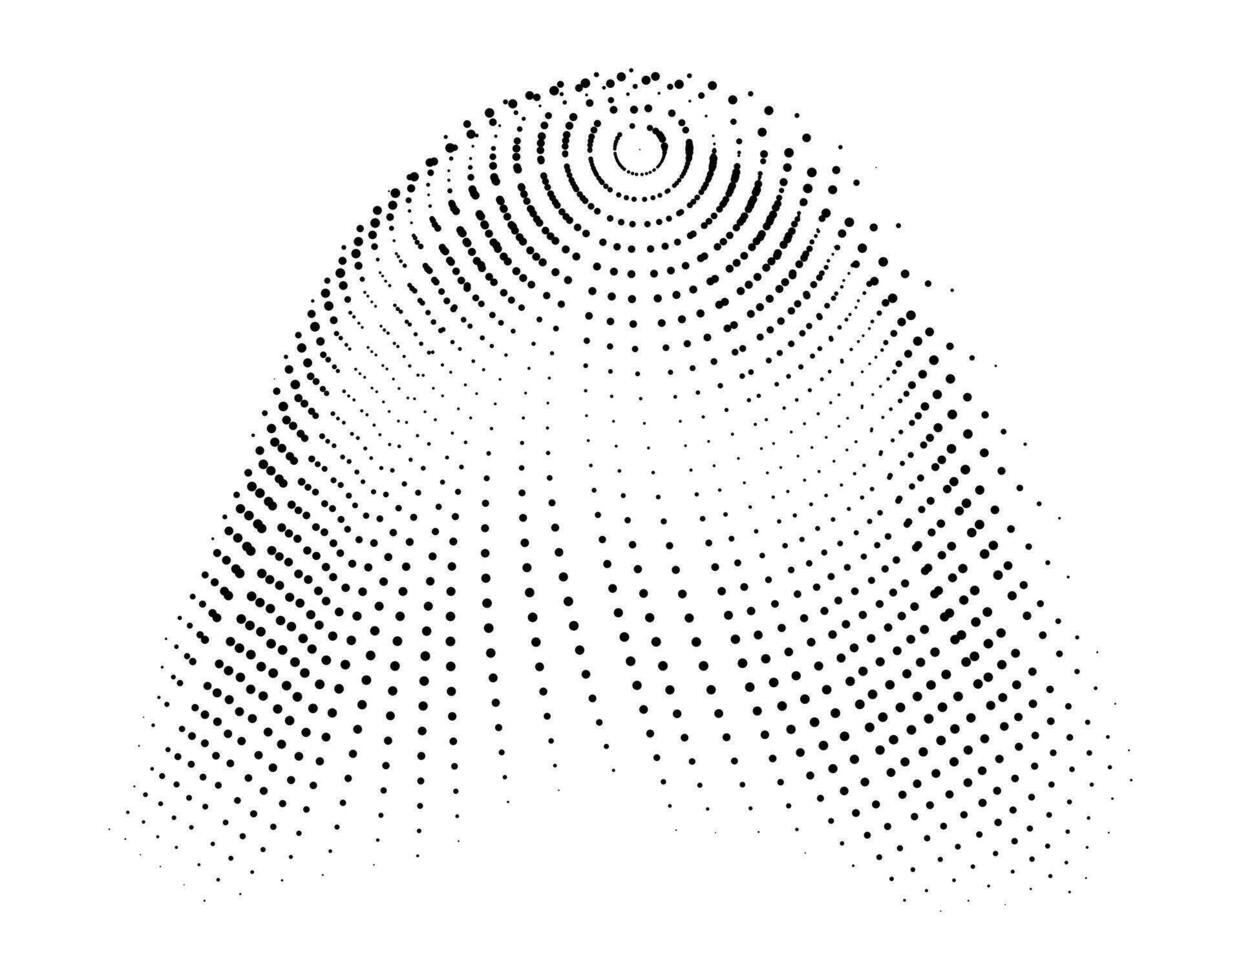 halftone vectore illustration halftone pattern halftone dots mesh halftone screen torus radial, a dot pattern on a white background, vector